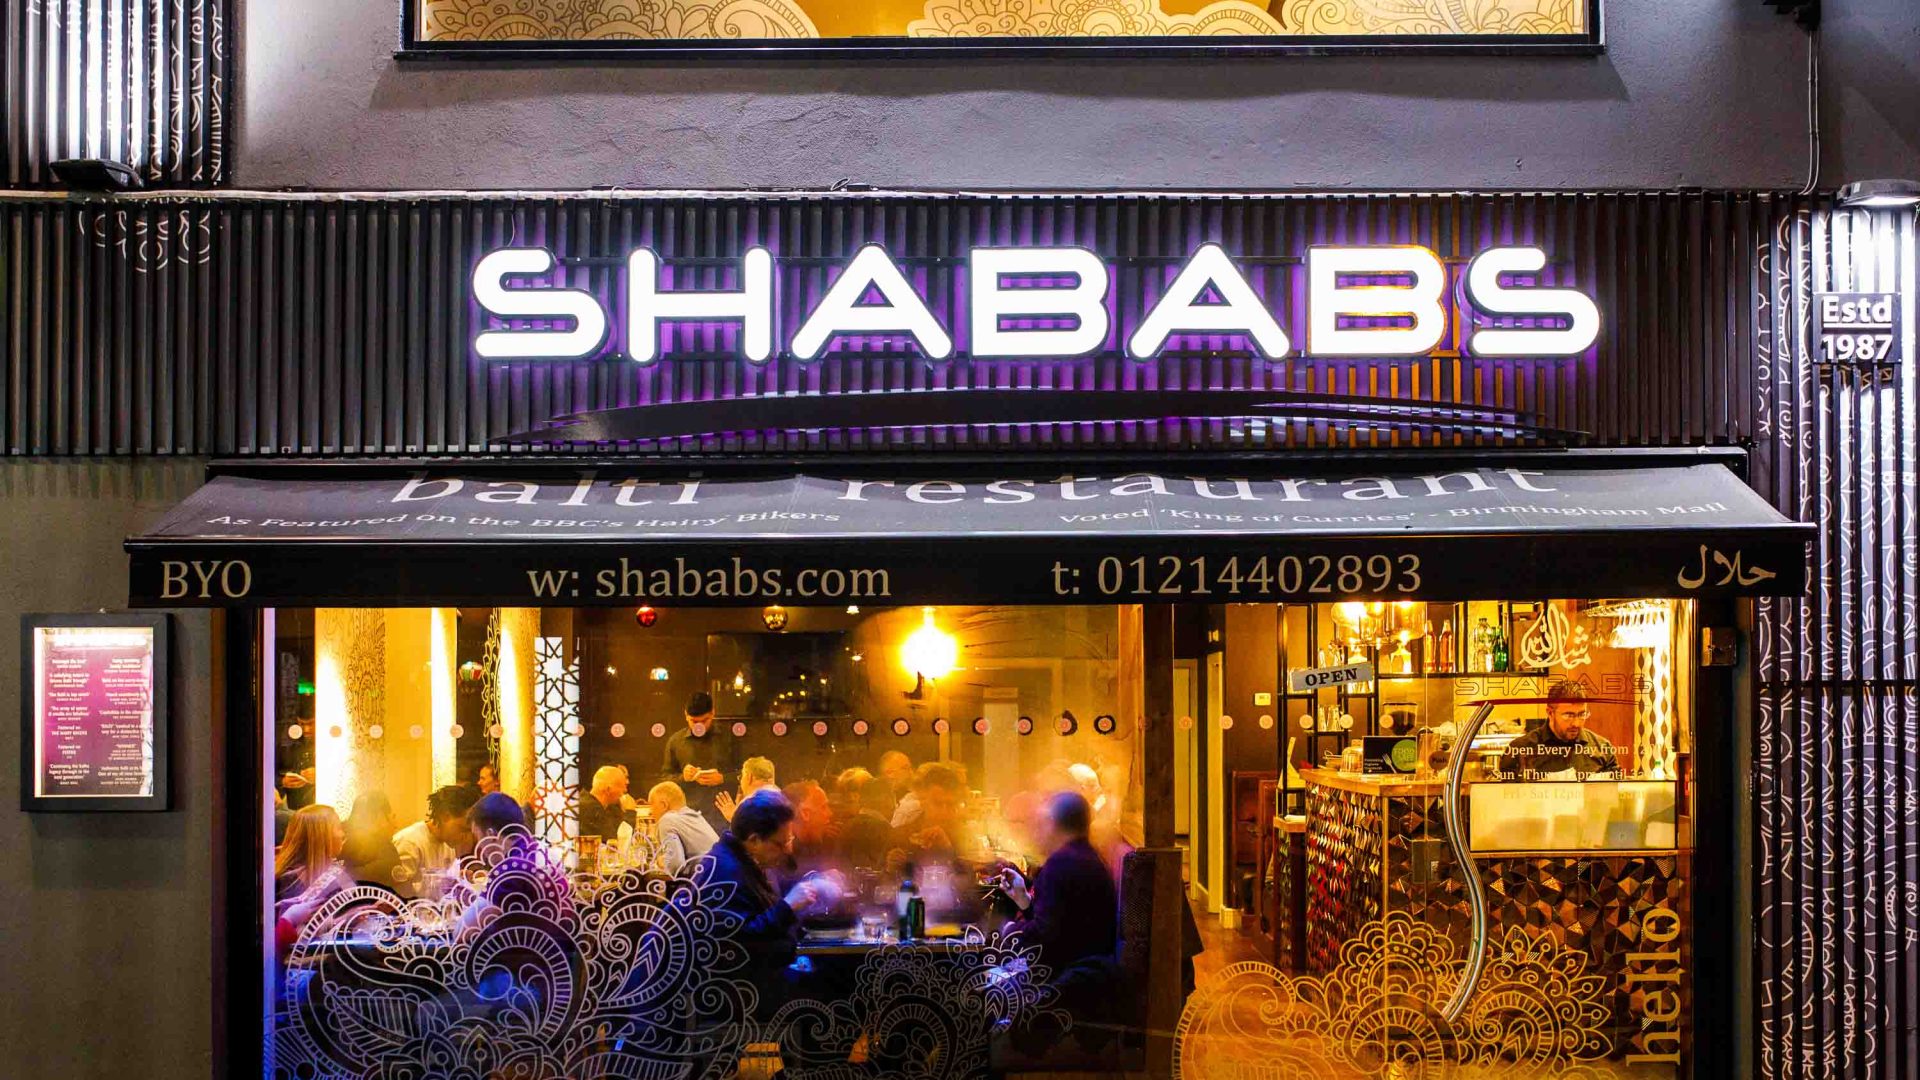 The exterior of Shababs. People sit outside, dining.